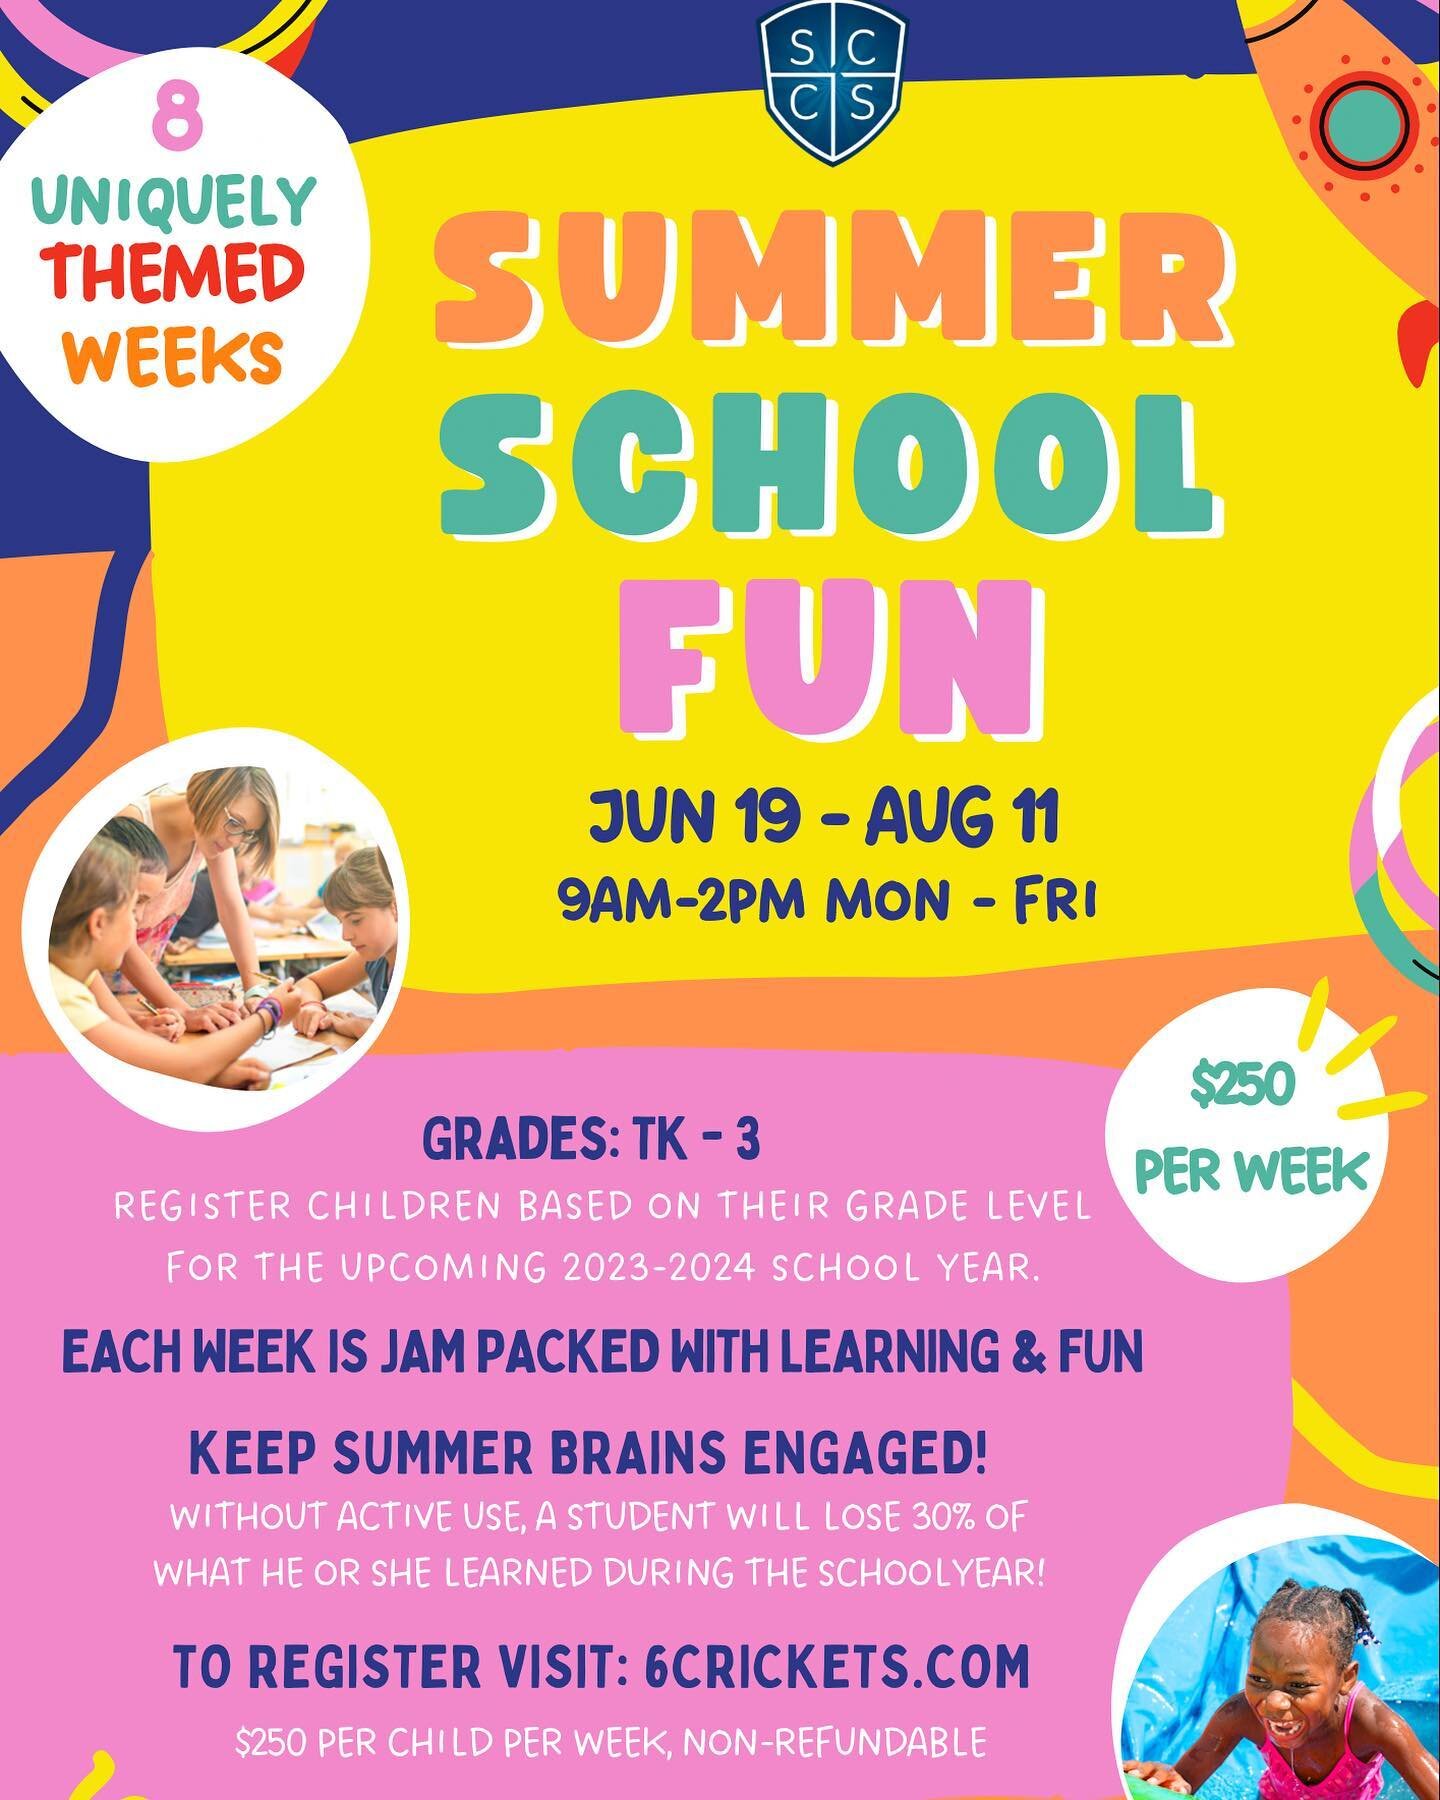 ☀️ SUMMER IS COMING! ☀️ SCCS is home to the best summer program for your kids. 8 weeks of learning and fun for kids entering TK-3rd grade. Mondays thru Fridays 9am - 2pm, perfect for working parents. Secure your student&rsquo;s spot now by clicking t